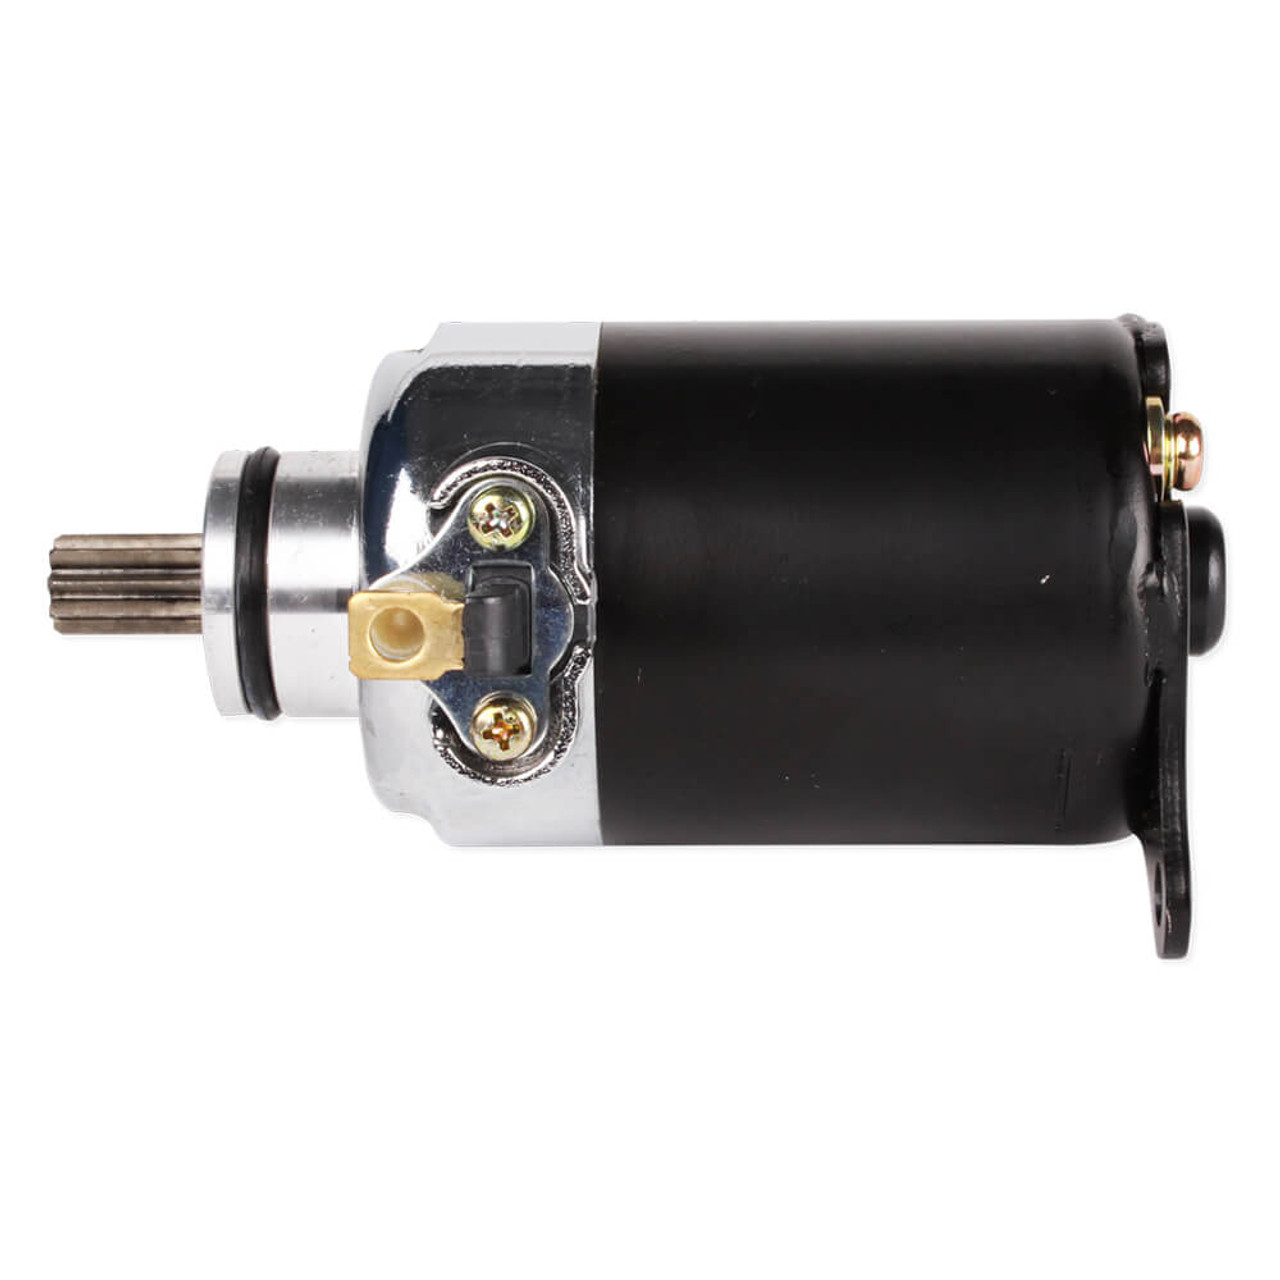 GY6 STARTER MOTOR FOR LARGER PERFORMANCE 172cc THRU 232cc ENGINES